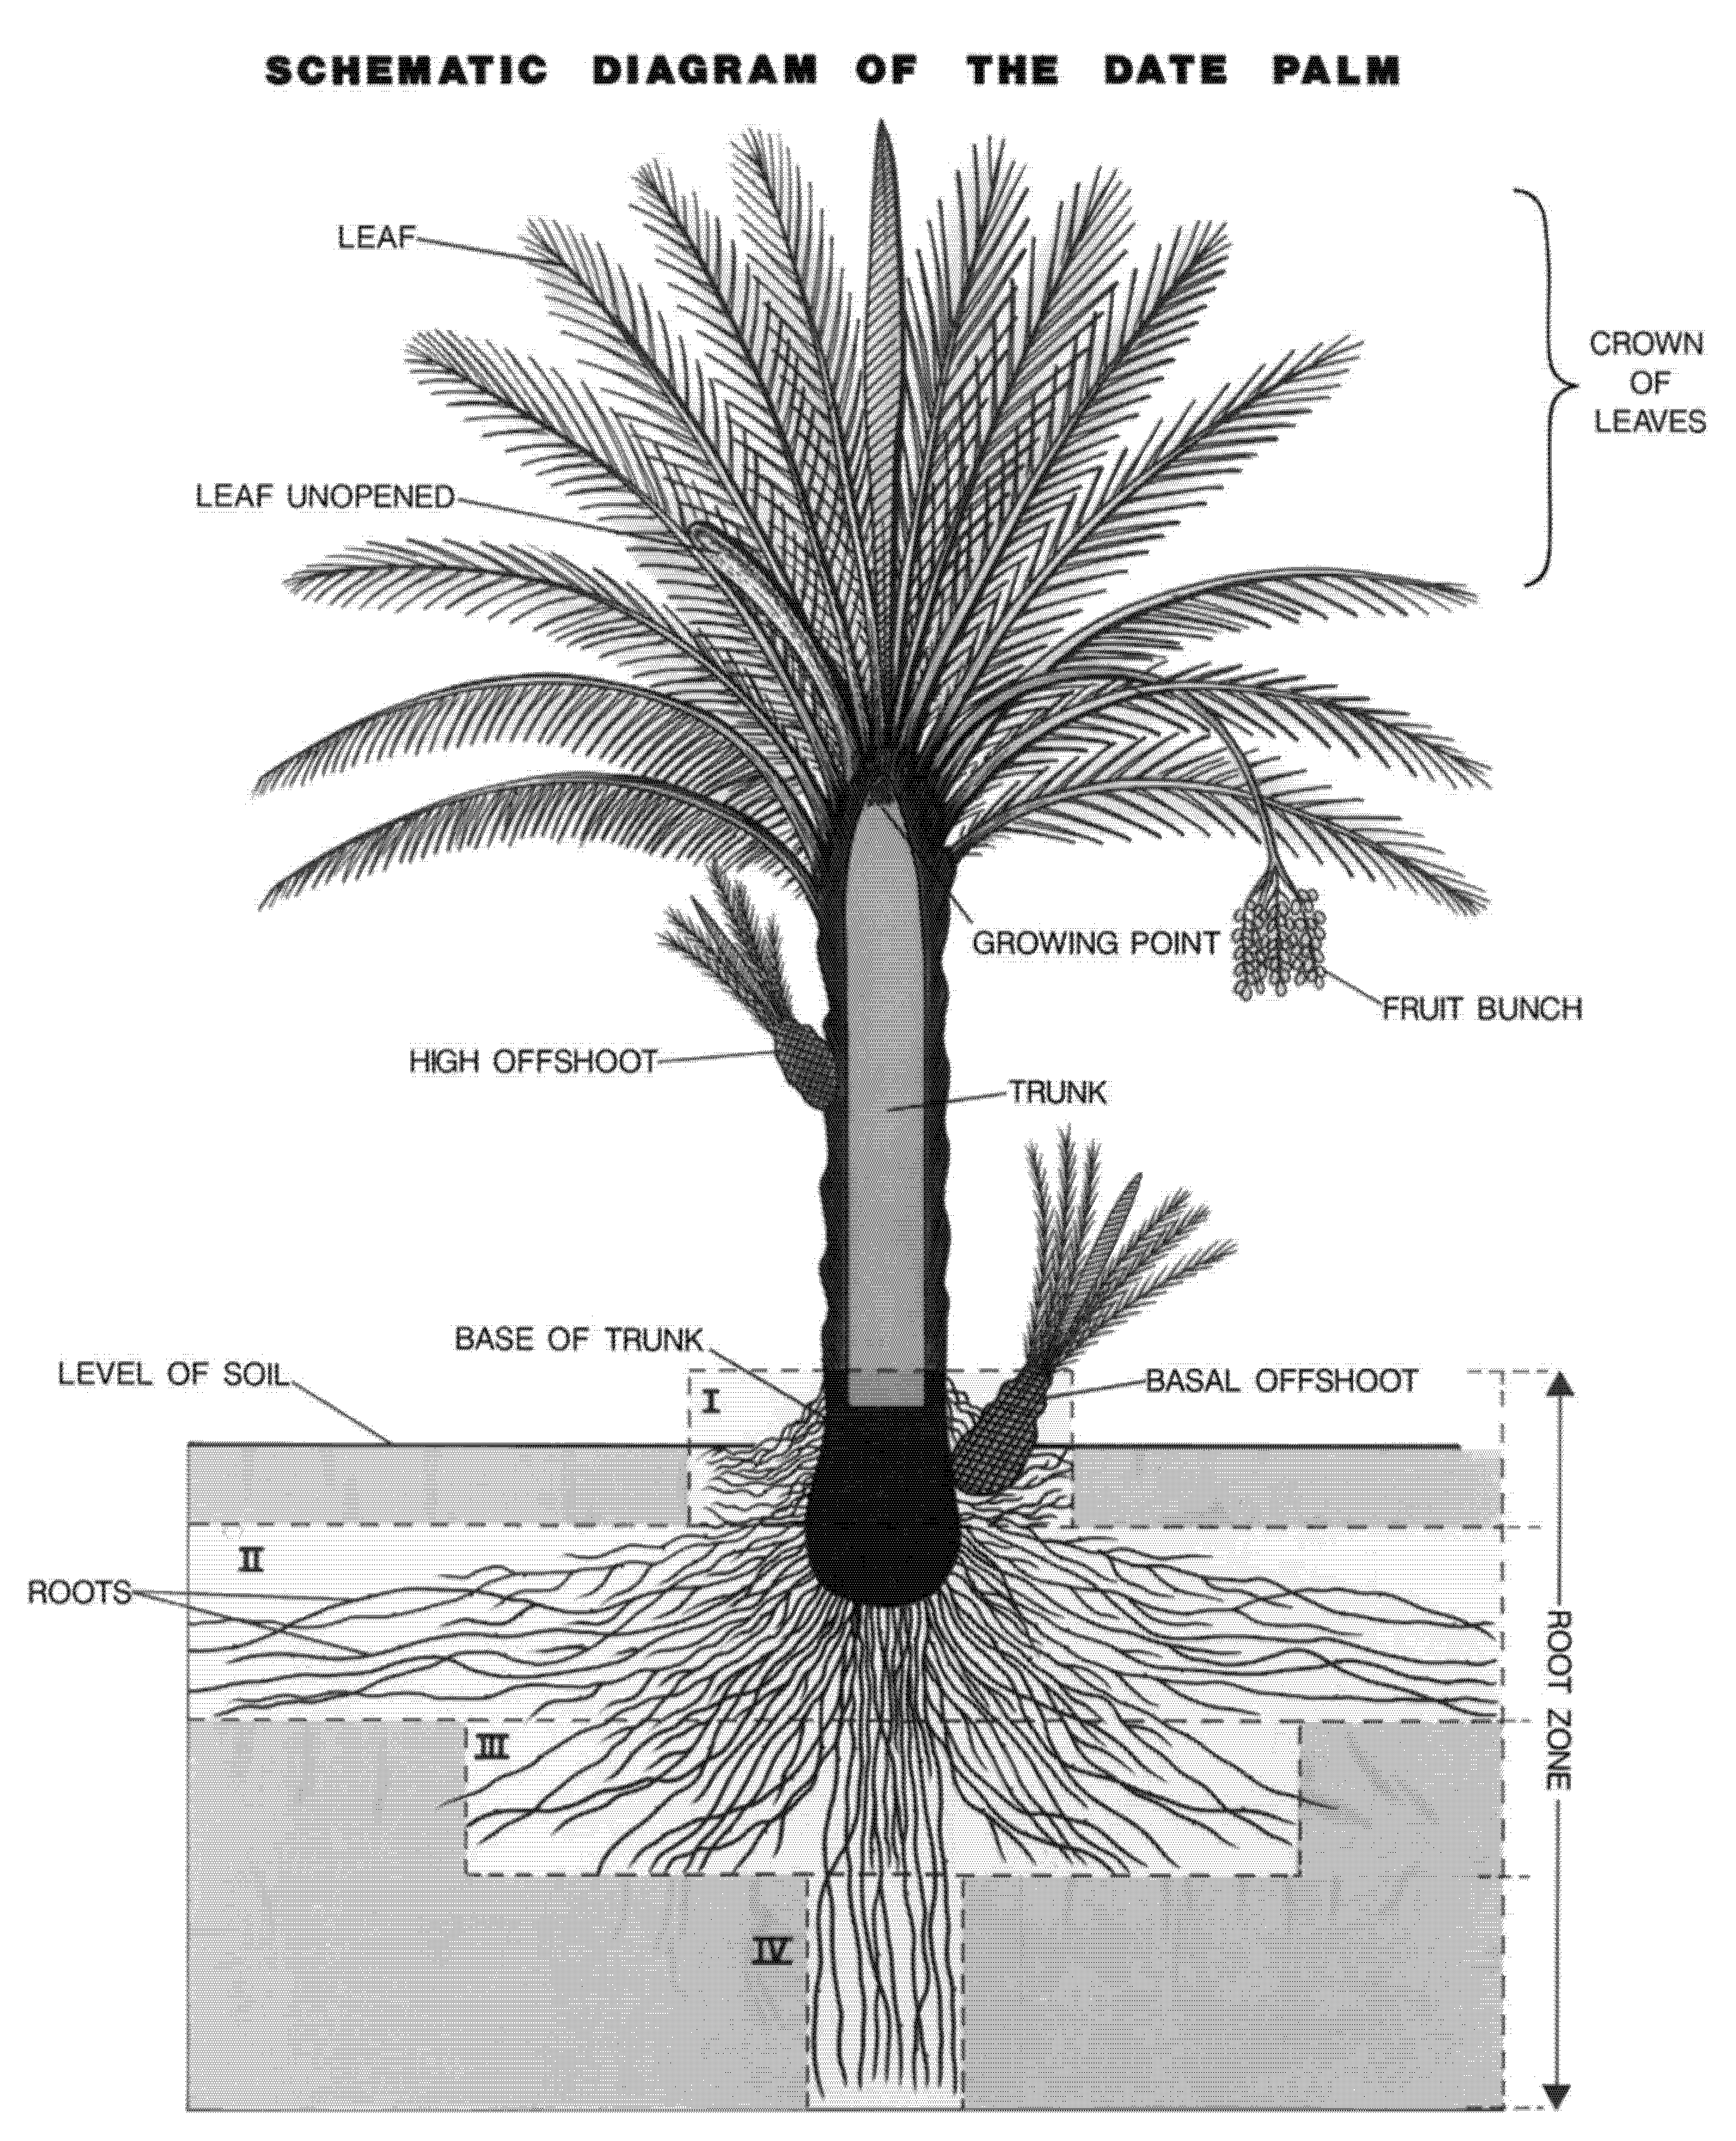 Schematic of Date Palm Tree